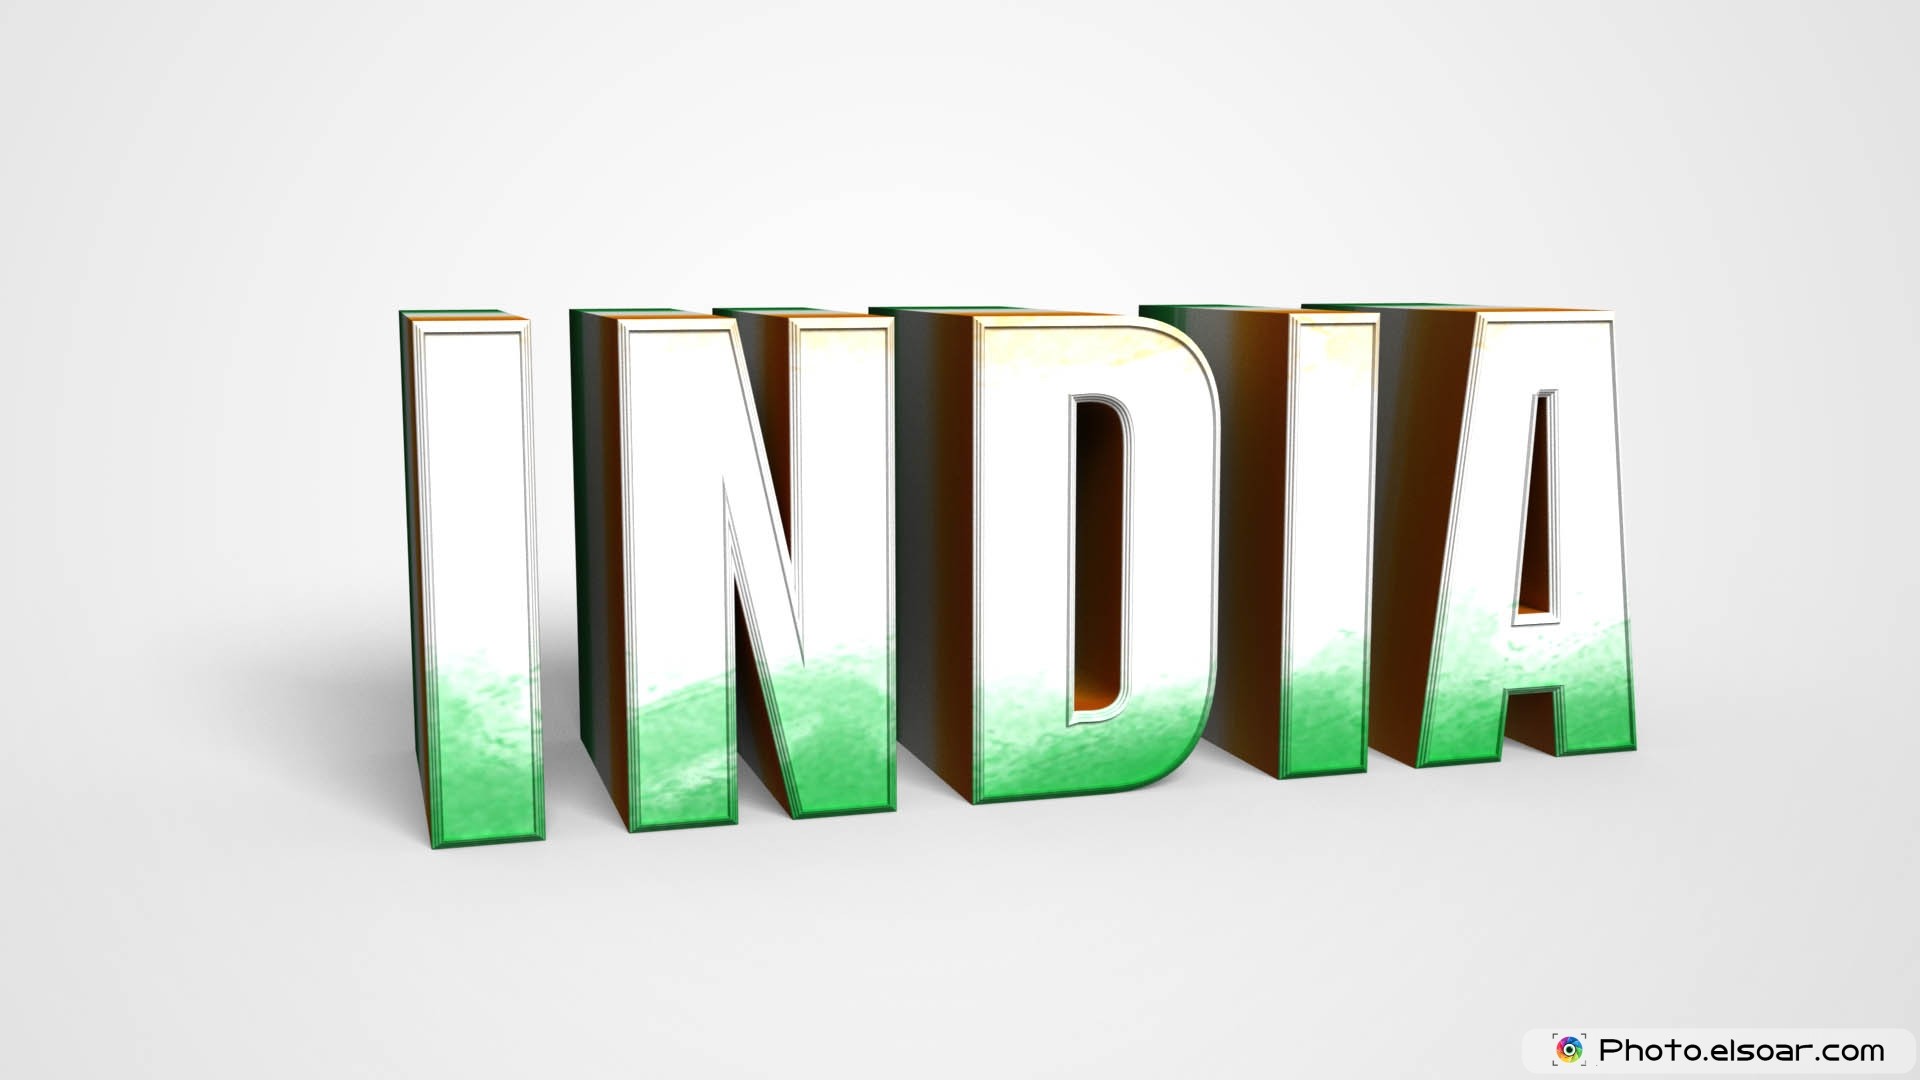 1920x1080 Indian Flag Image Make 3D Text Indian National Flag With India Text For The  Republic Day Images